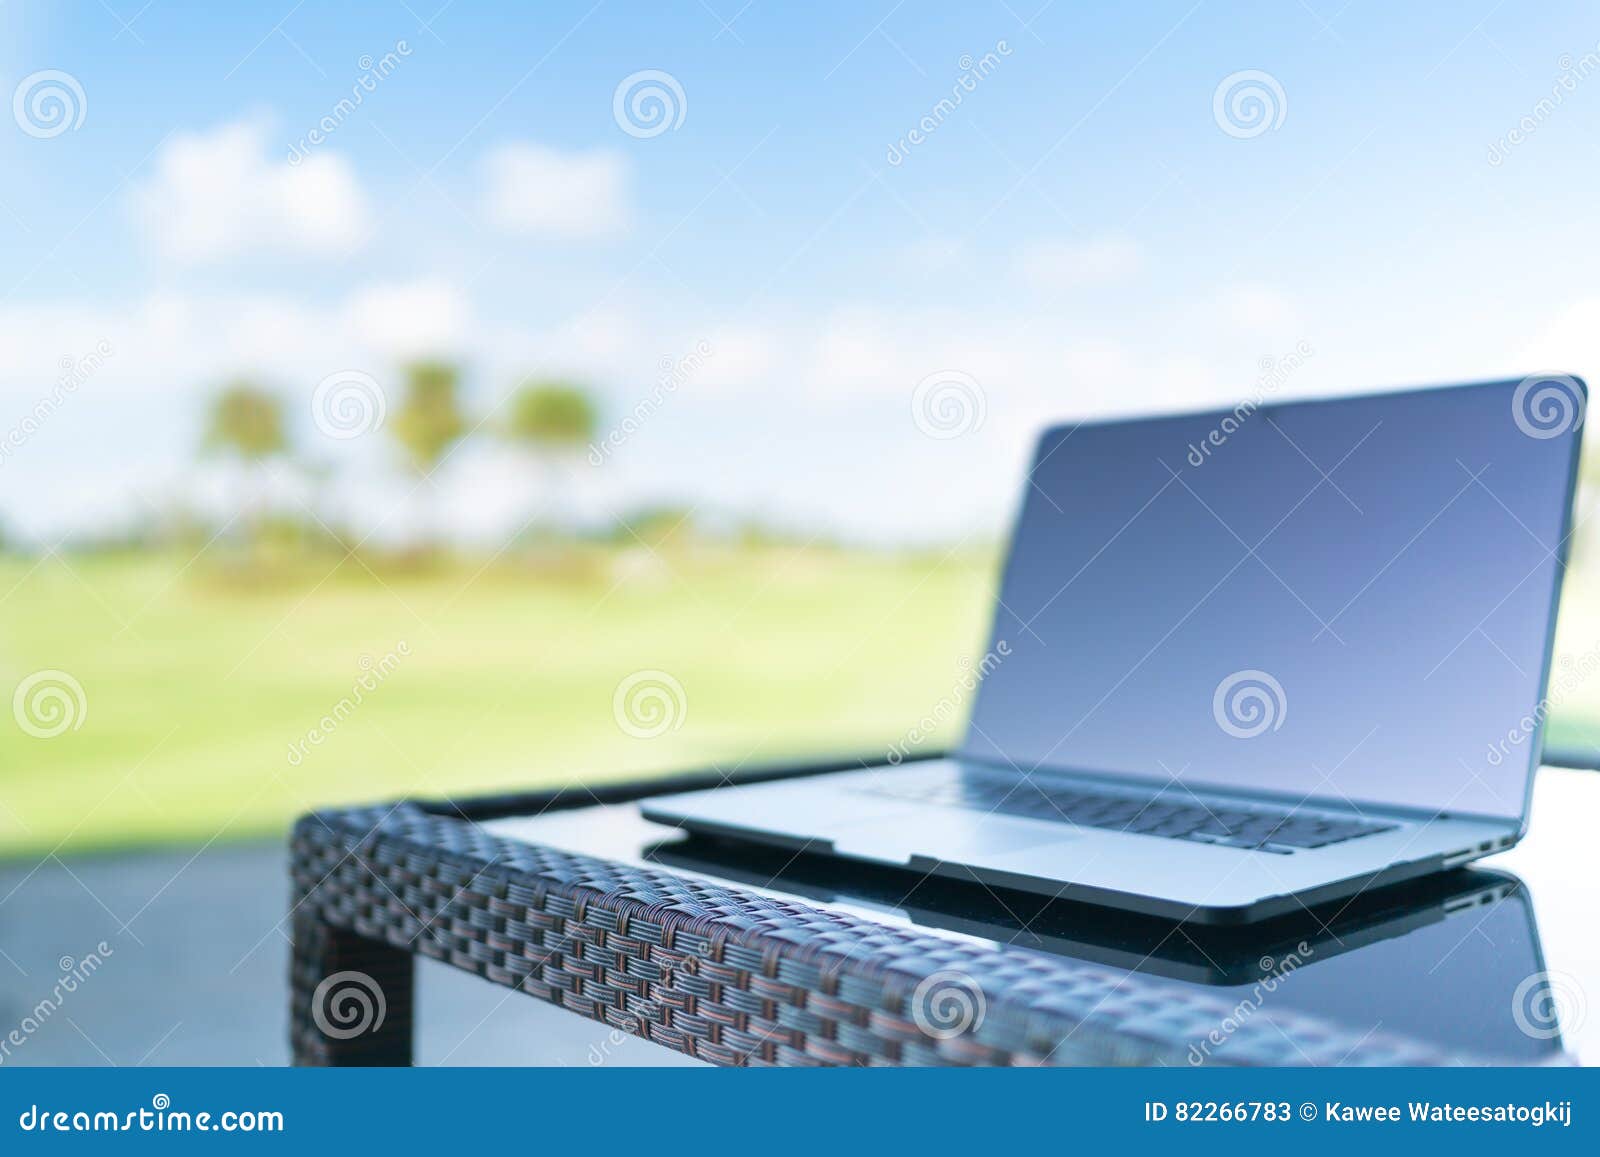 laptop on golf course blur background with copy space, business or work from anywhere concept, depth of field effect